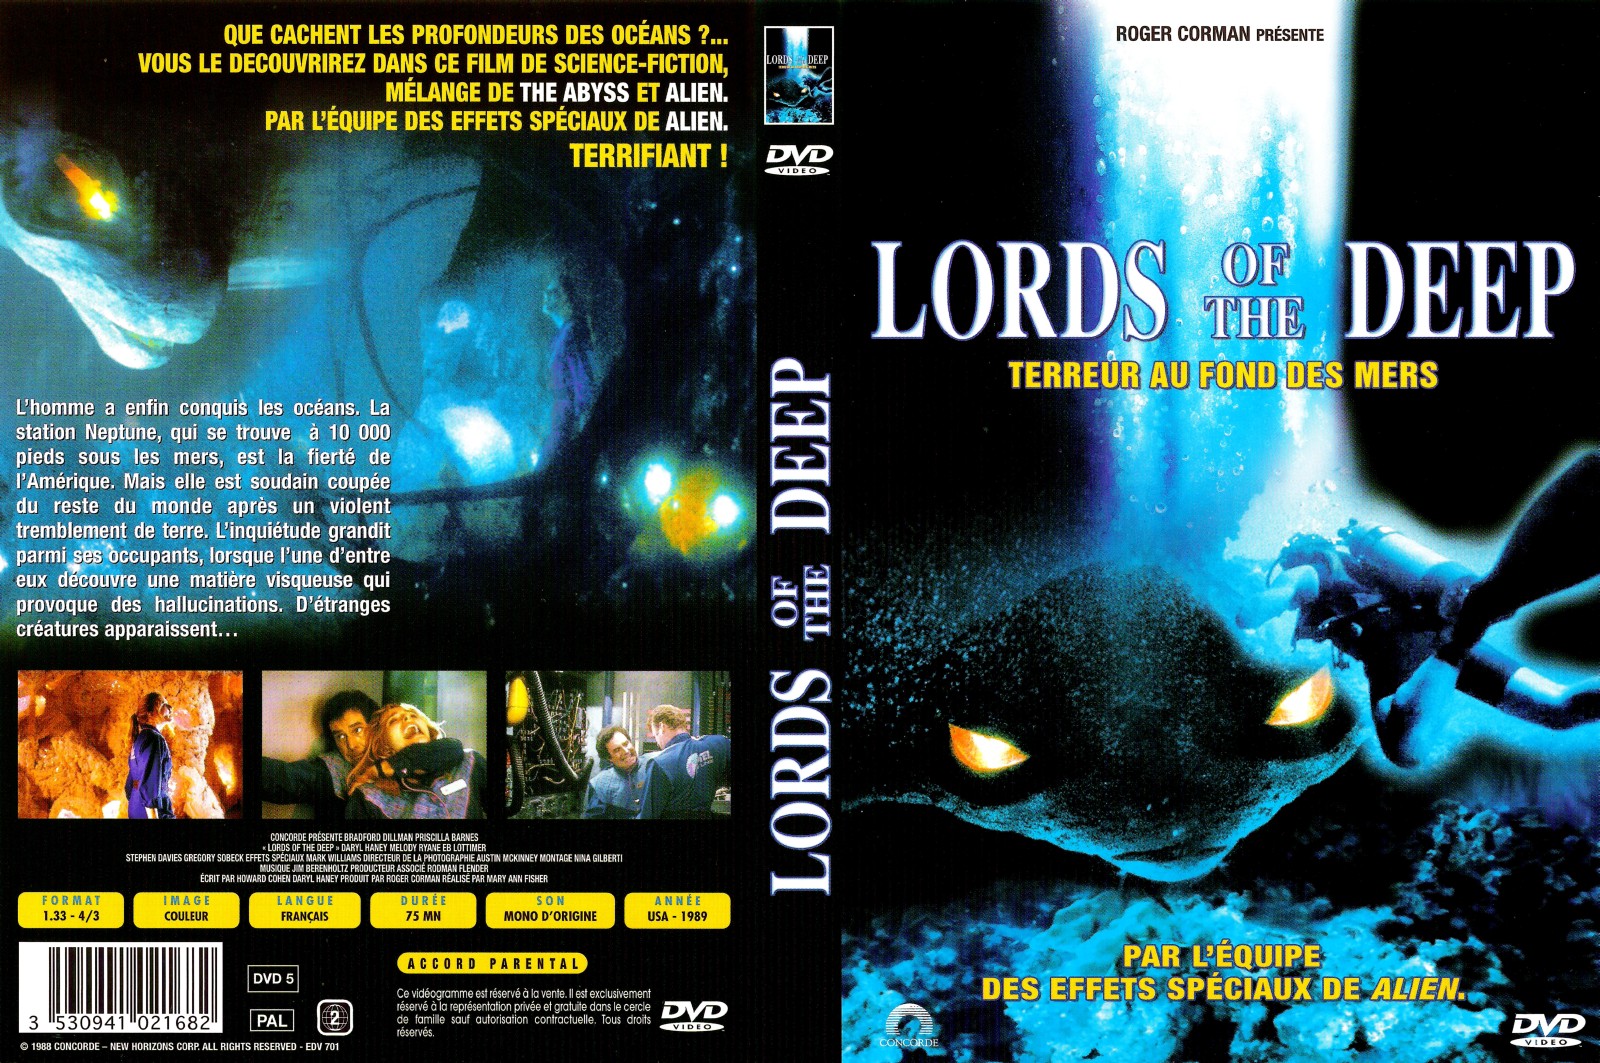 Jaquette DVD Lords of the deep